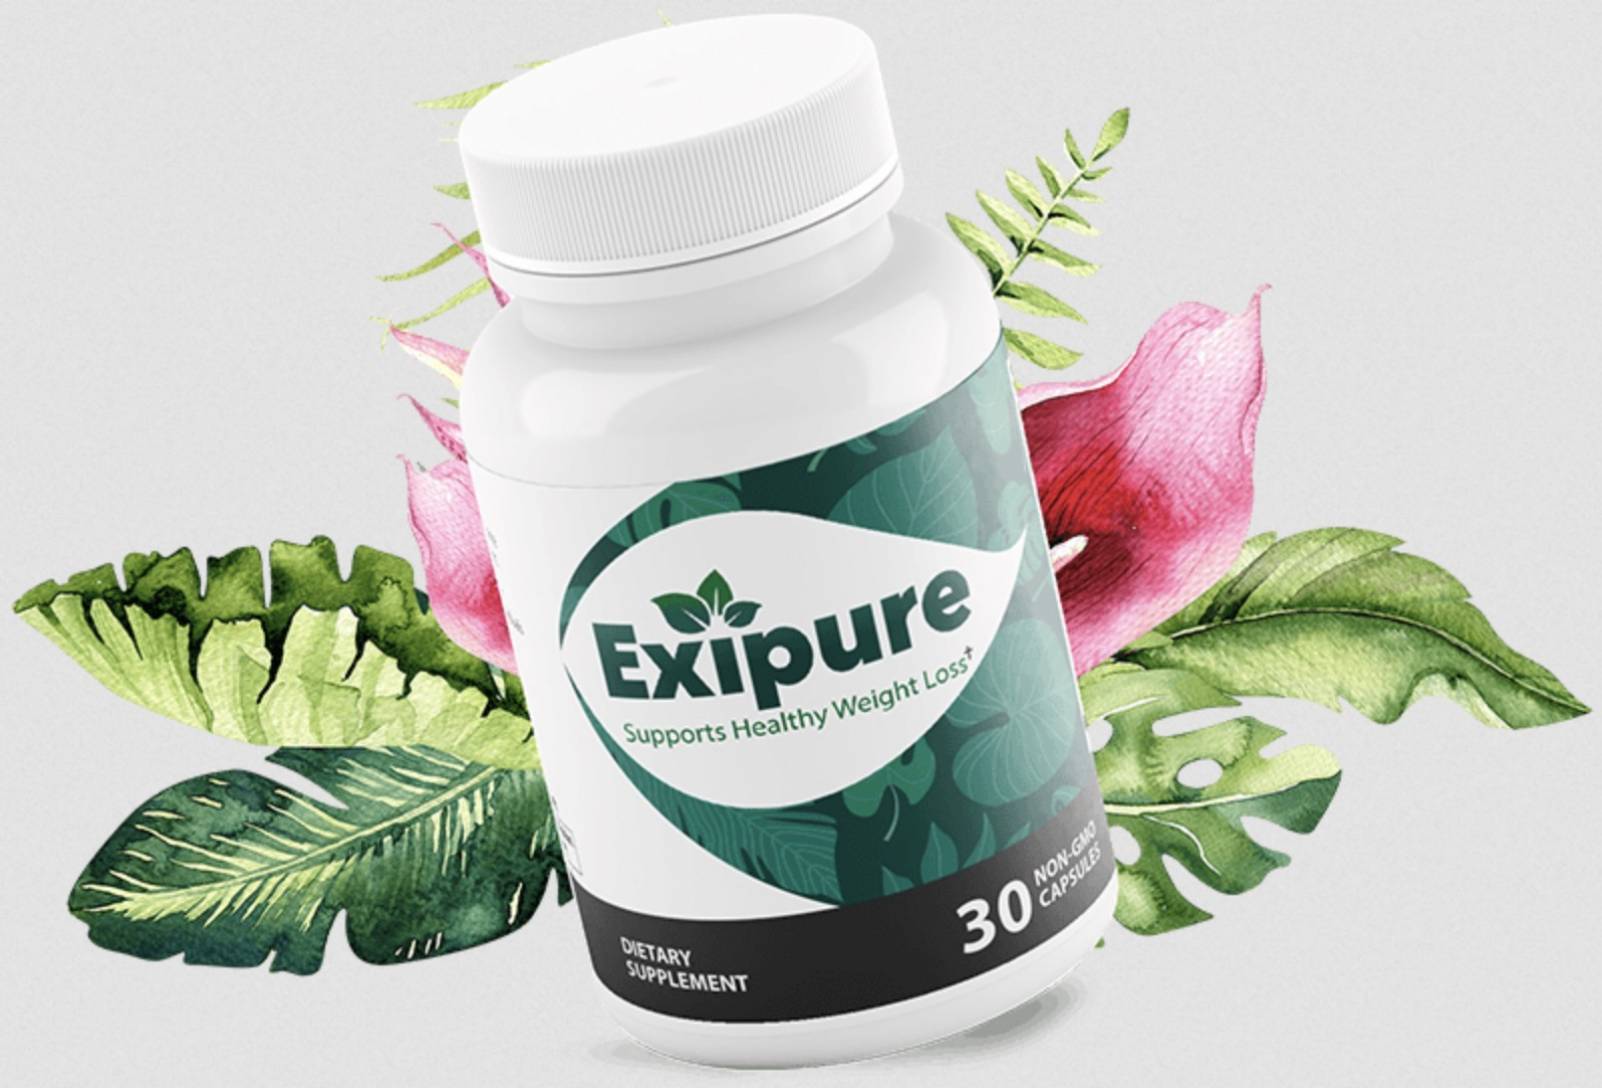 Customer Reviews For Exipure